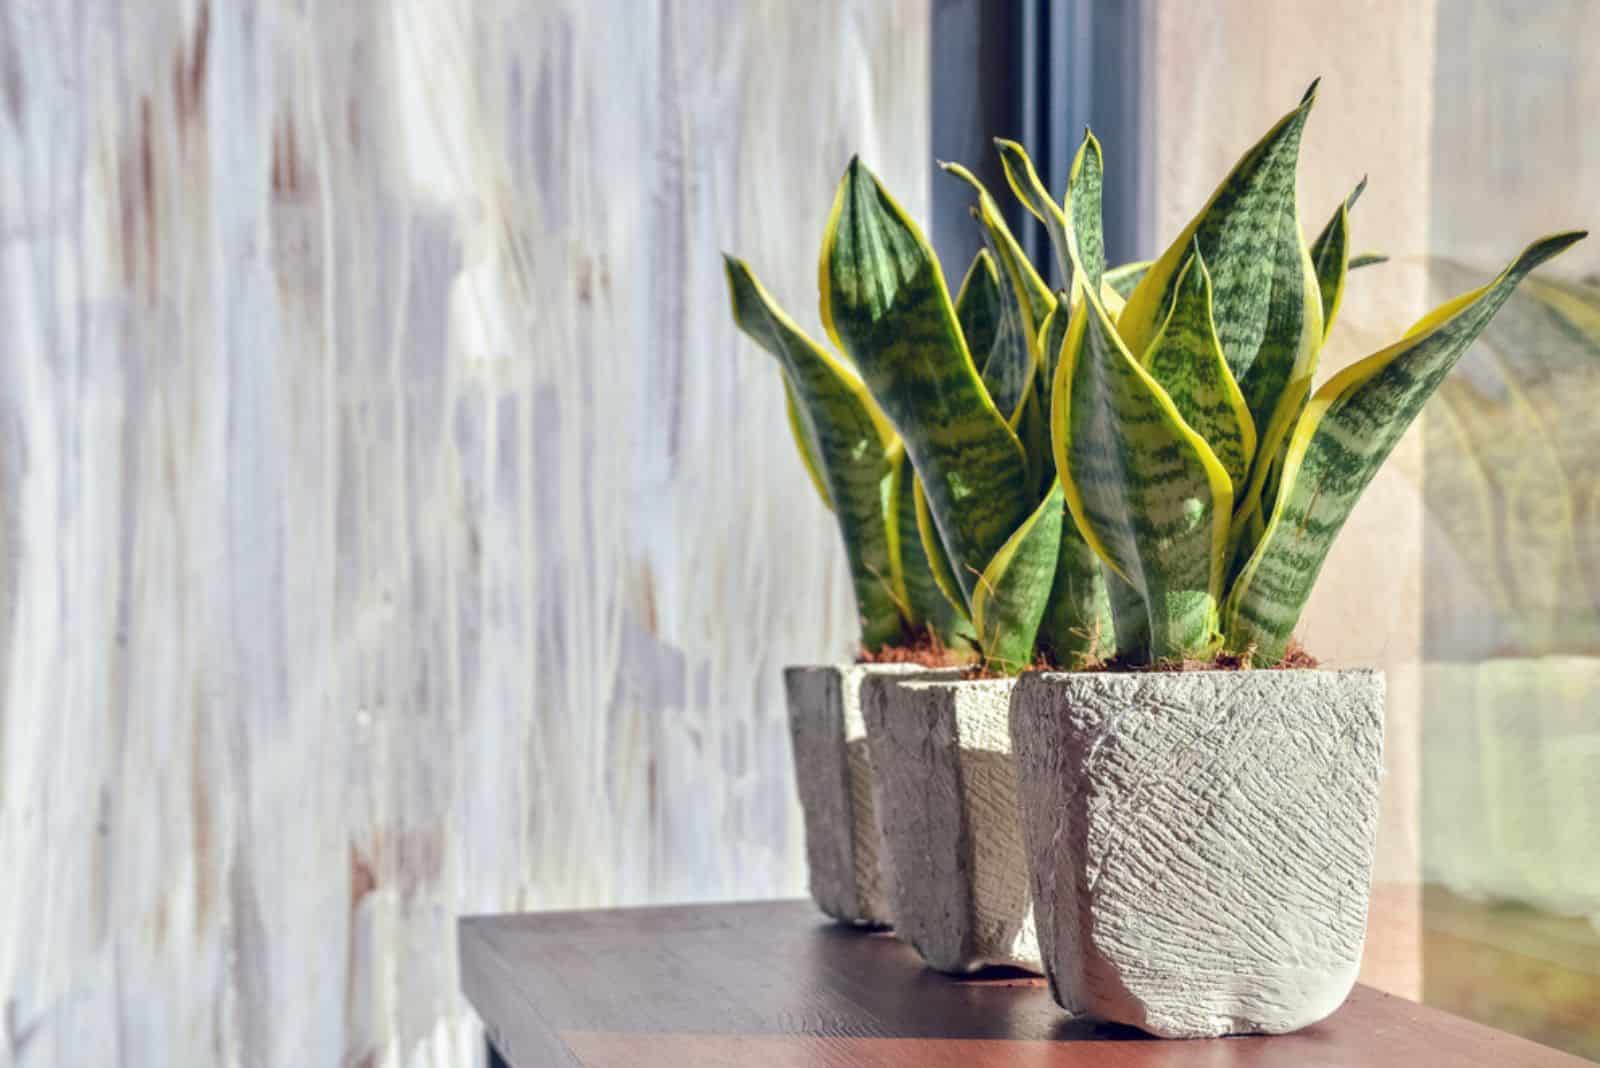 Expand Your Plant Collection With These 9 Easy-to-propagate Houseplants